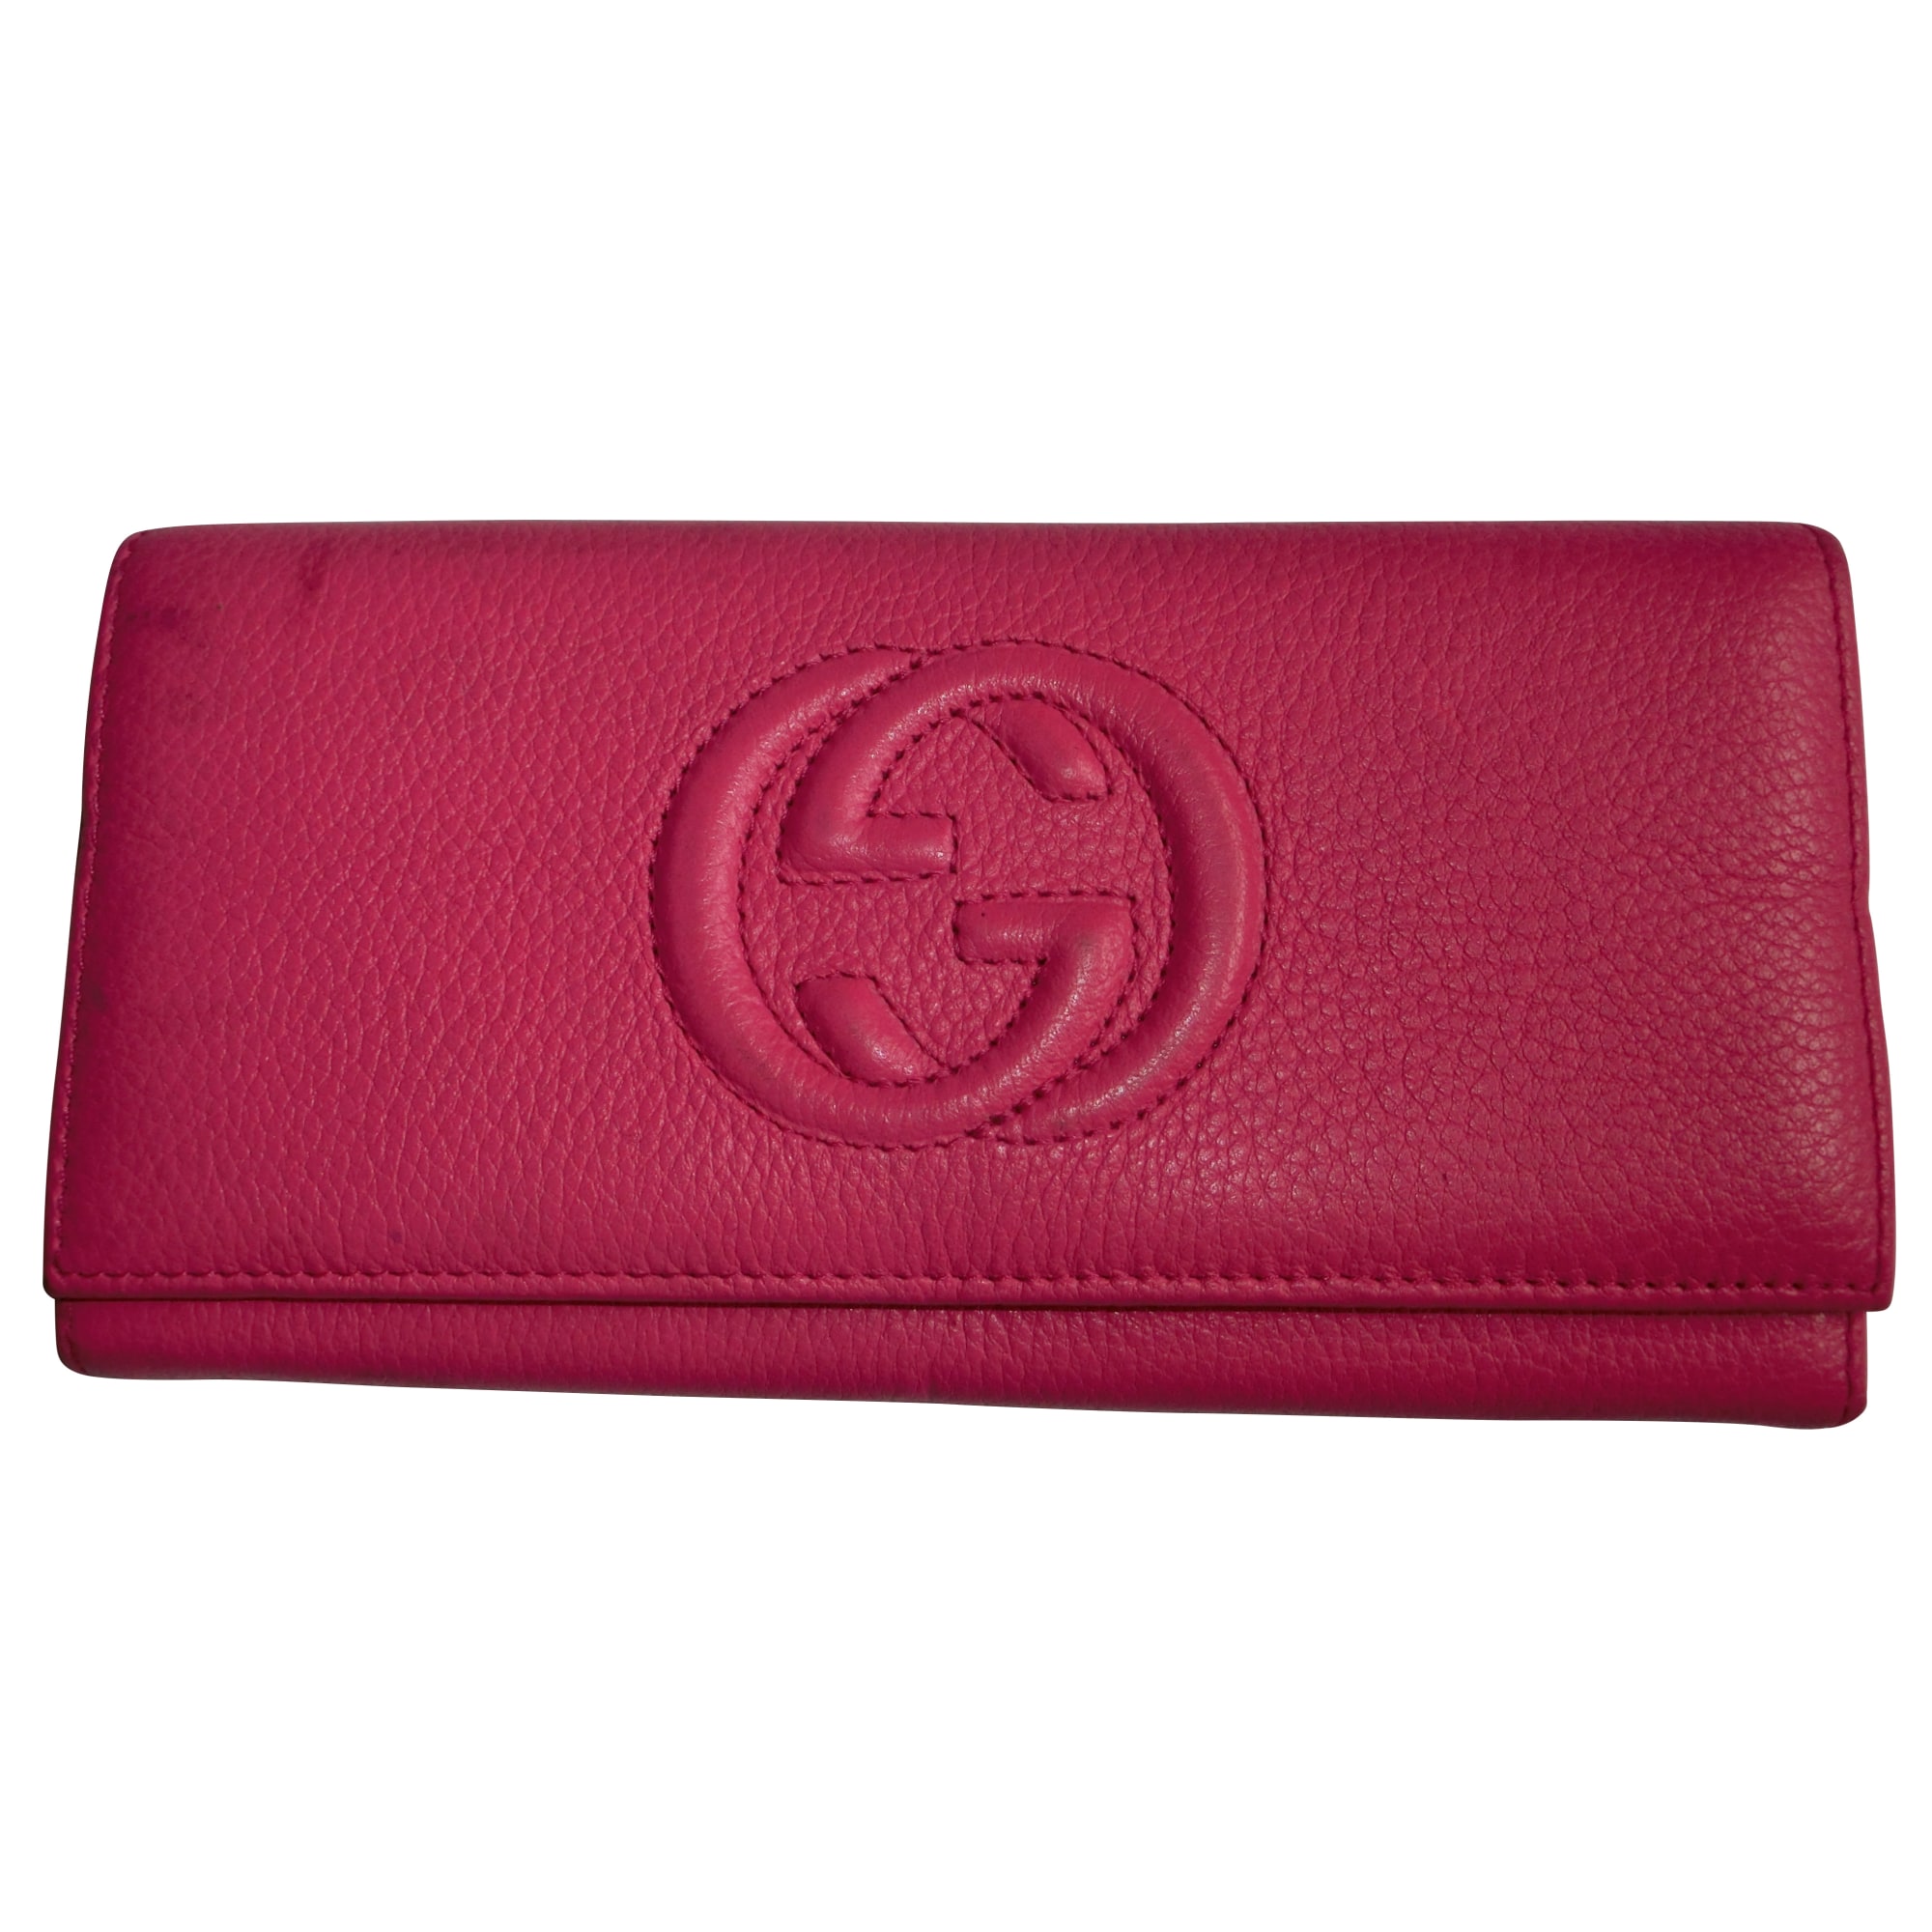 Portefeuille GUCCI rose - 3324779